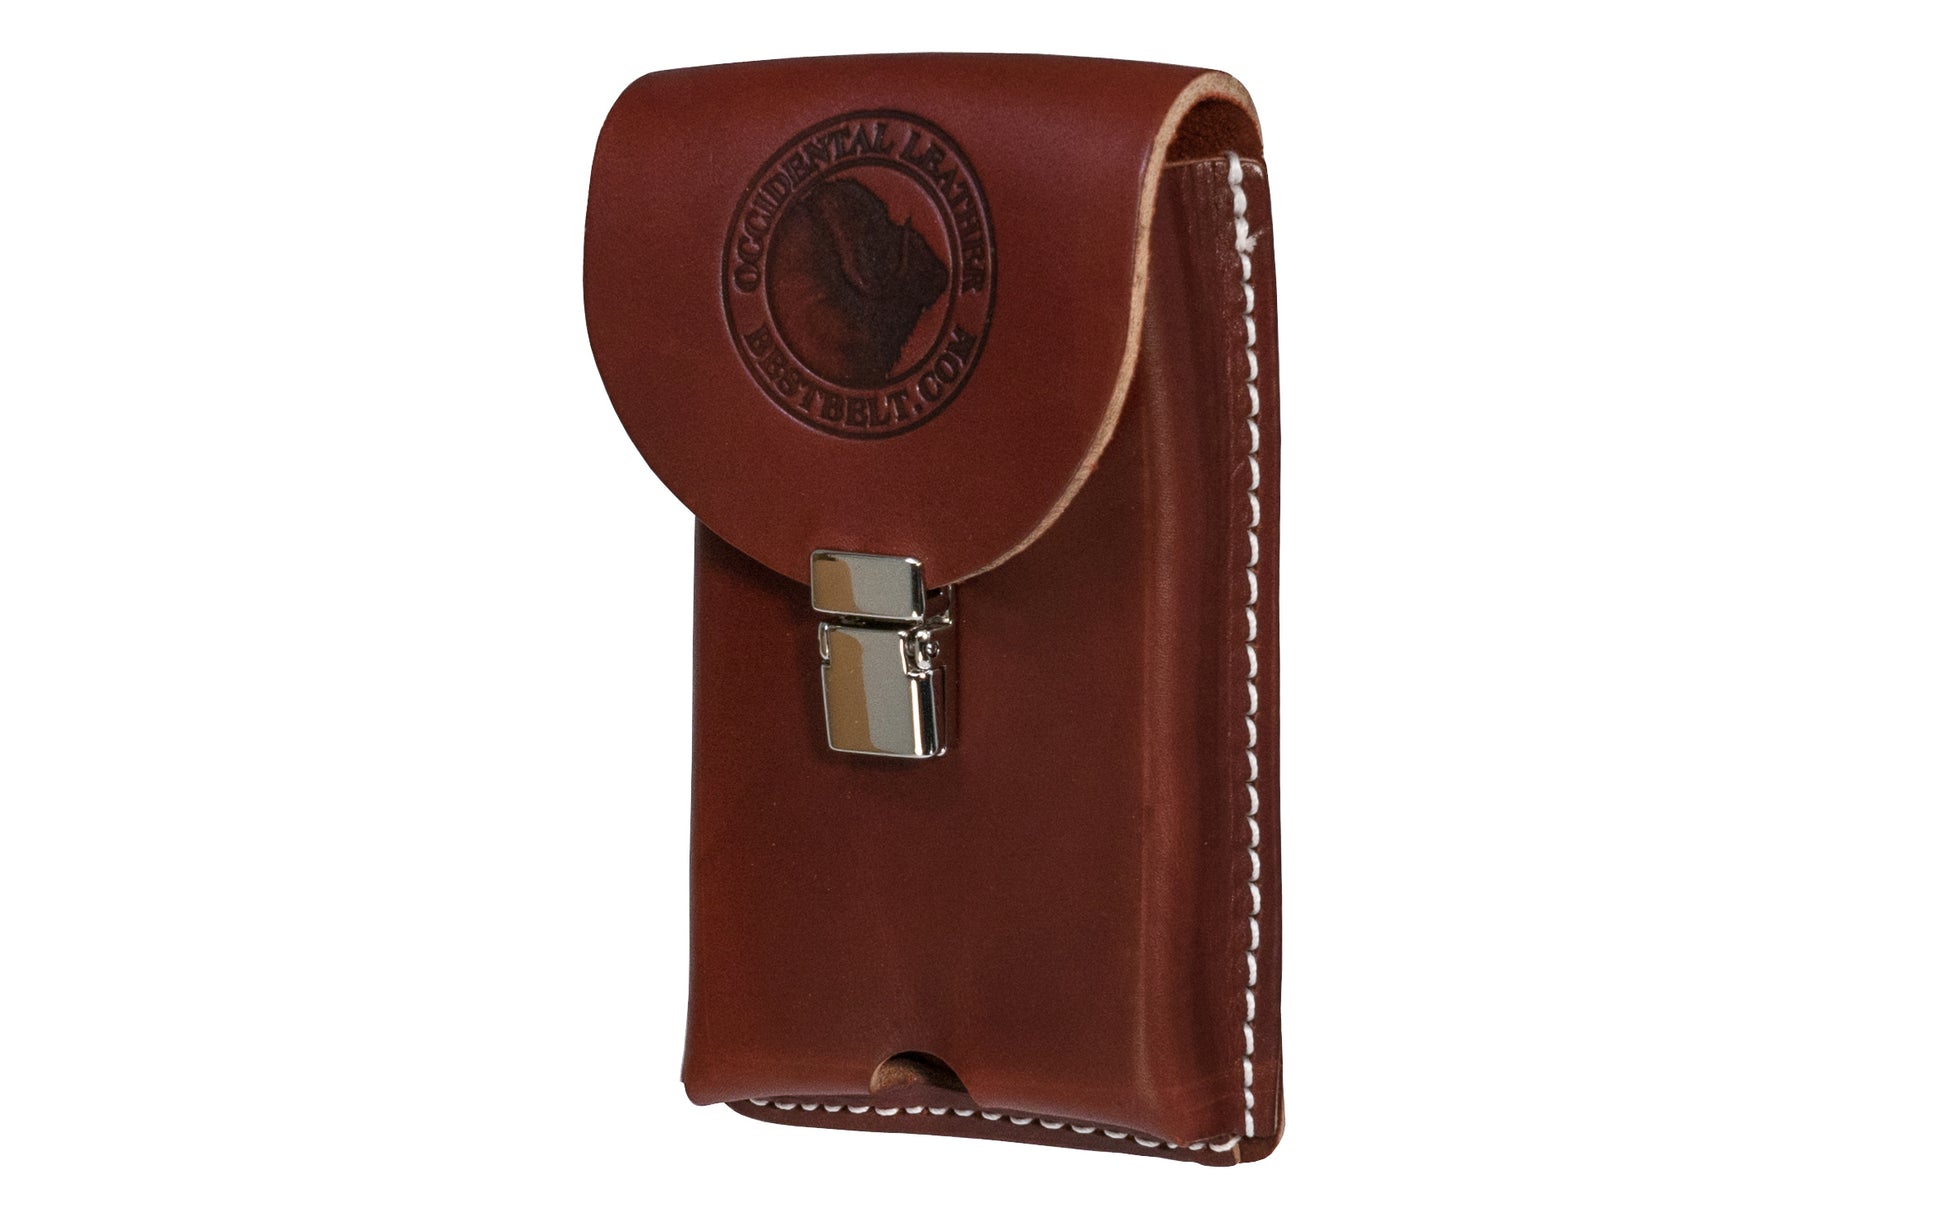 Occidental Leather Clip-On Phone Holder ~ 5326 - Model No. 5326 ~ Fits iPhone 5, 6, 7, & many others ~ Clips onto up to 2" wide belt ~ Made of Latigo belting leather ~ Italian-styled drop clasp - Hand Made iphone holster - Made in USA ~ Genuine Leather phone Holder holster ~ 759244211504 - Clip-On Belt - Leather